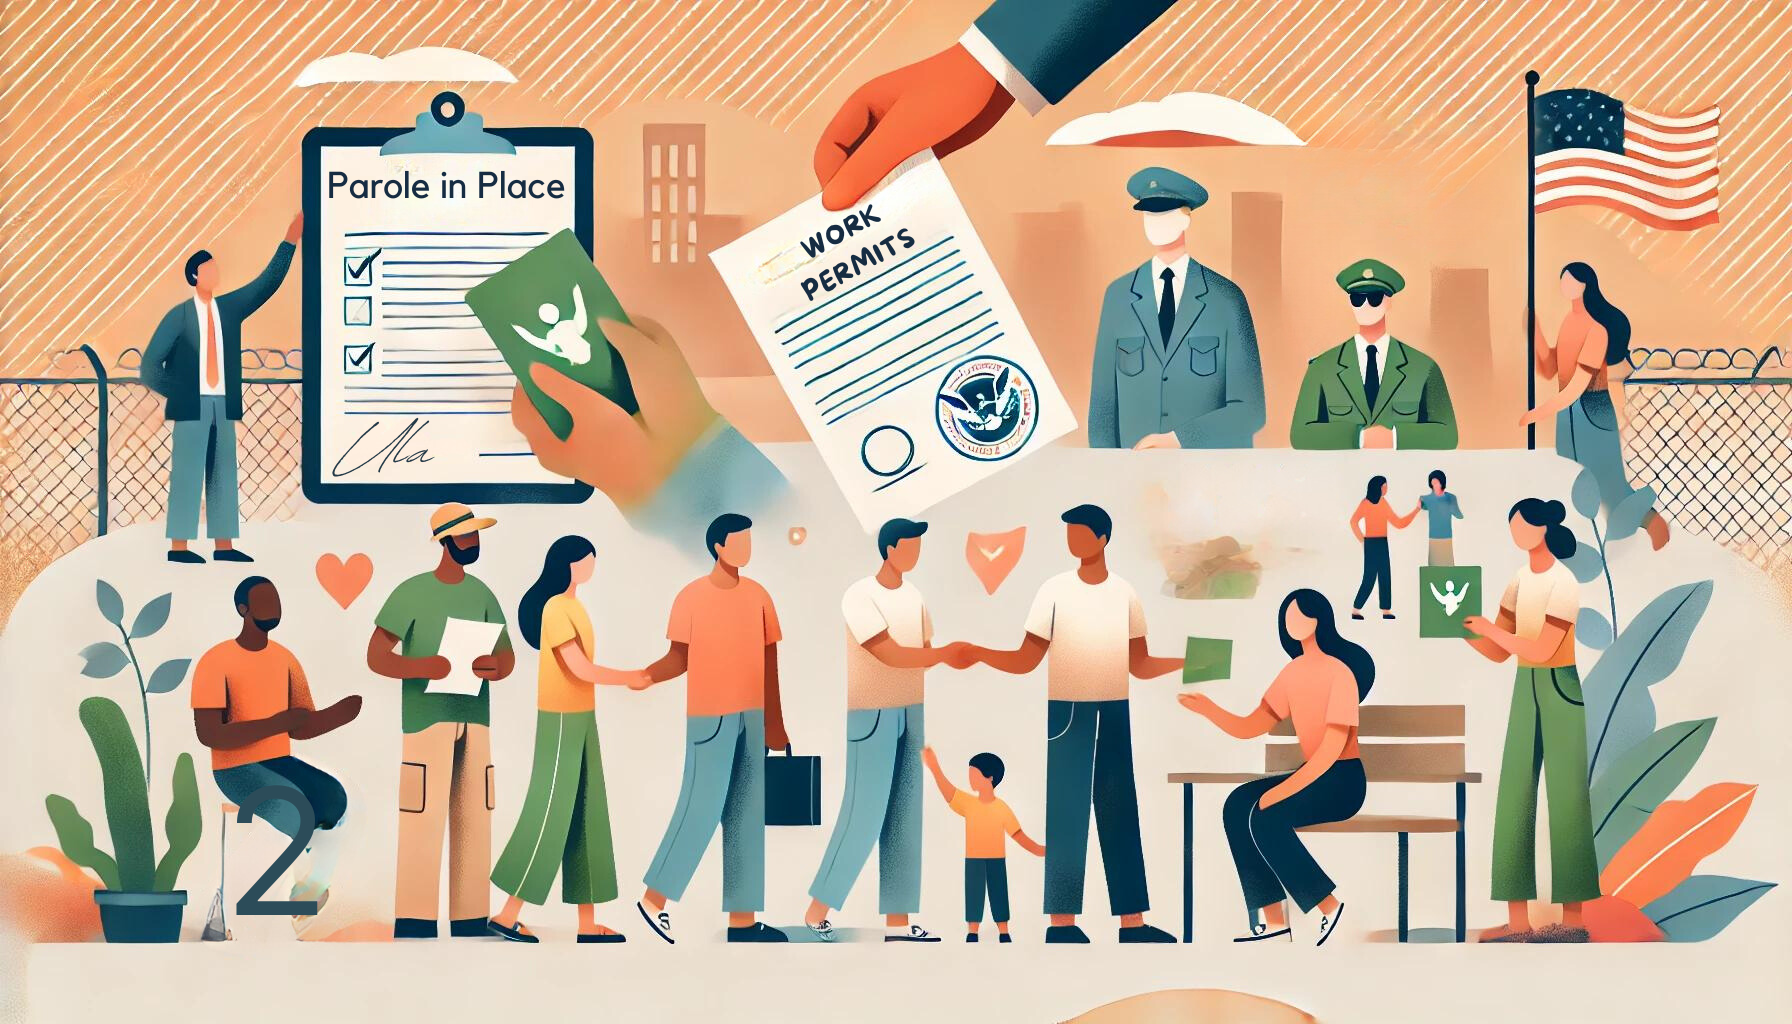 An illustration showing a diverse group of individuals receiving documents like work permits and green cards. The image includes minimalistic elements such as a person filling out forms and an official handing over a green card. The colors are warm and hopeful, representing the positive impact of parole in place for immigrants.